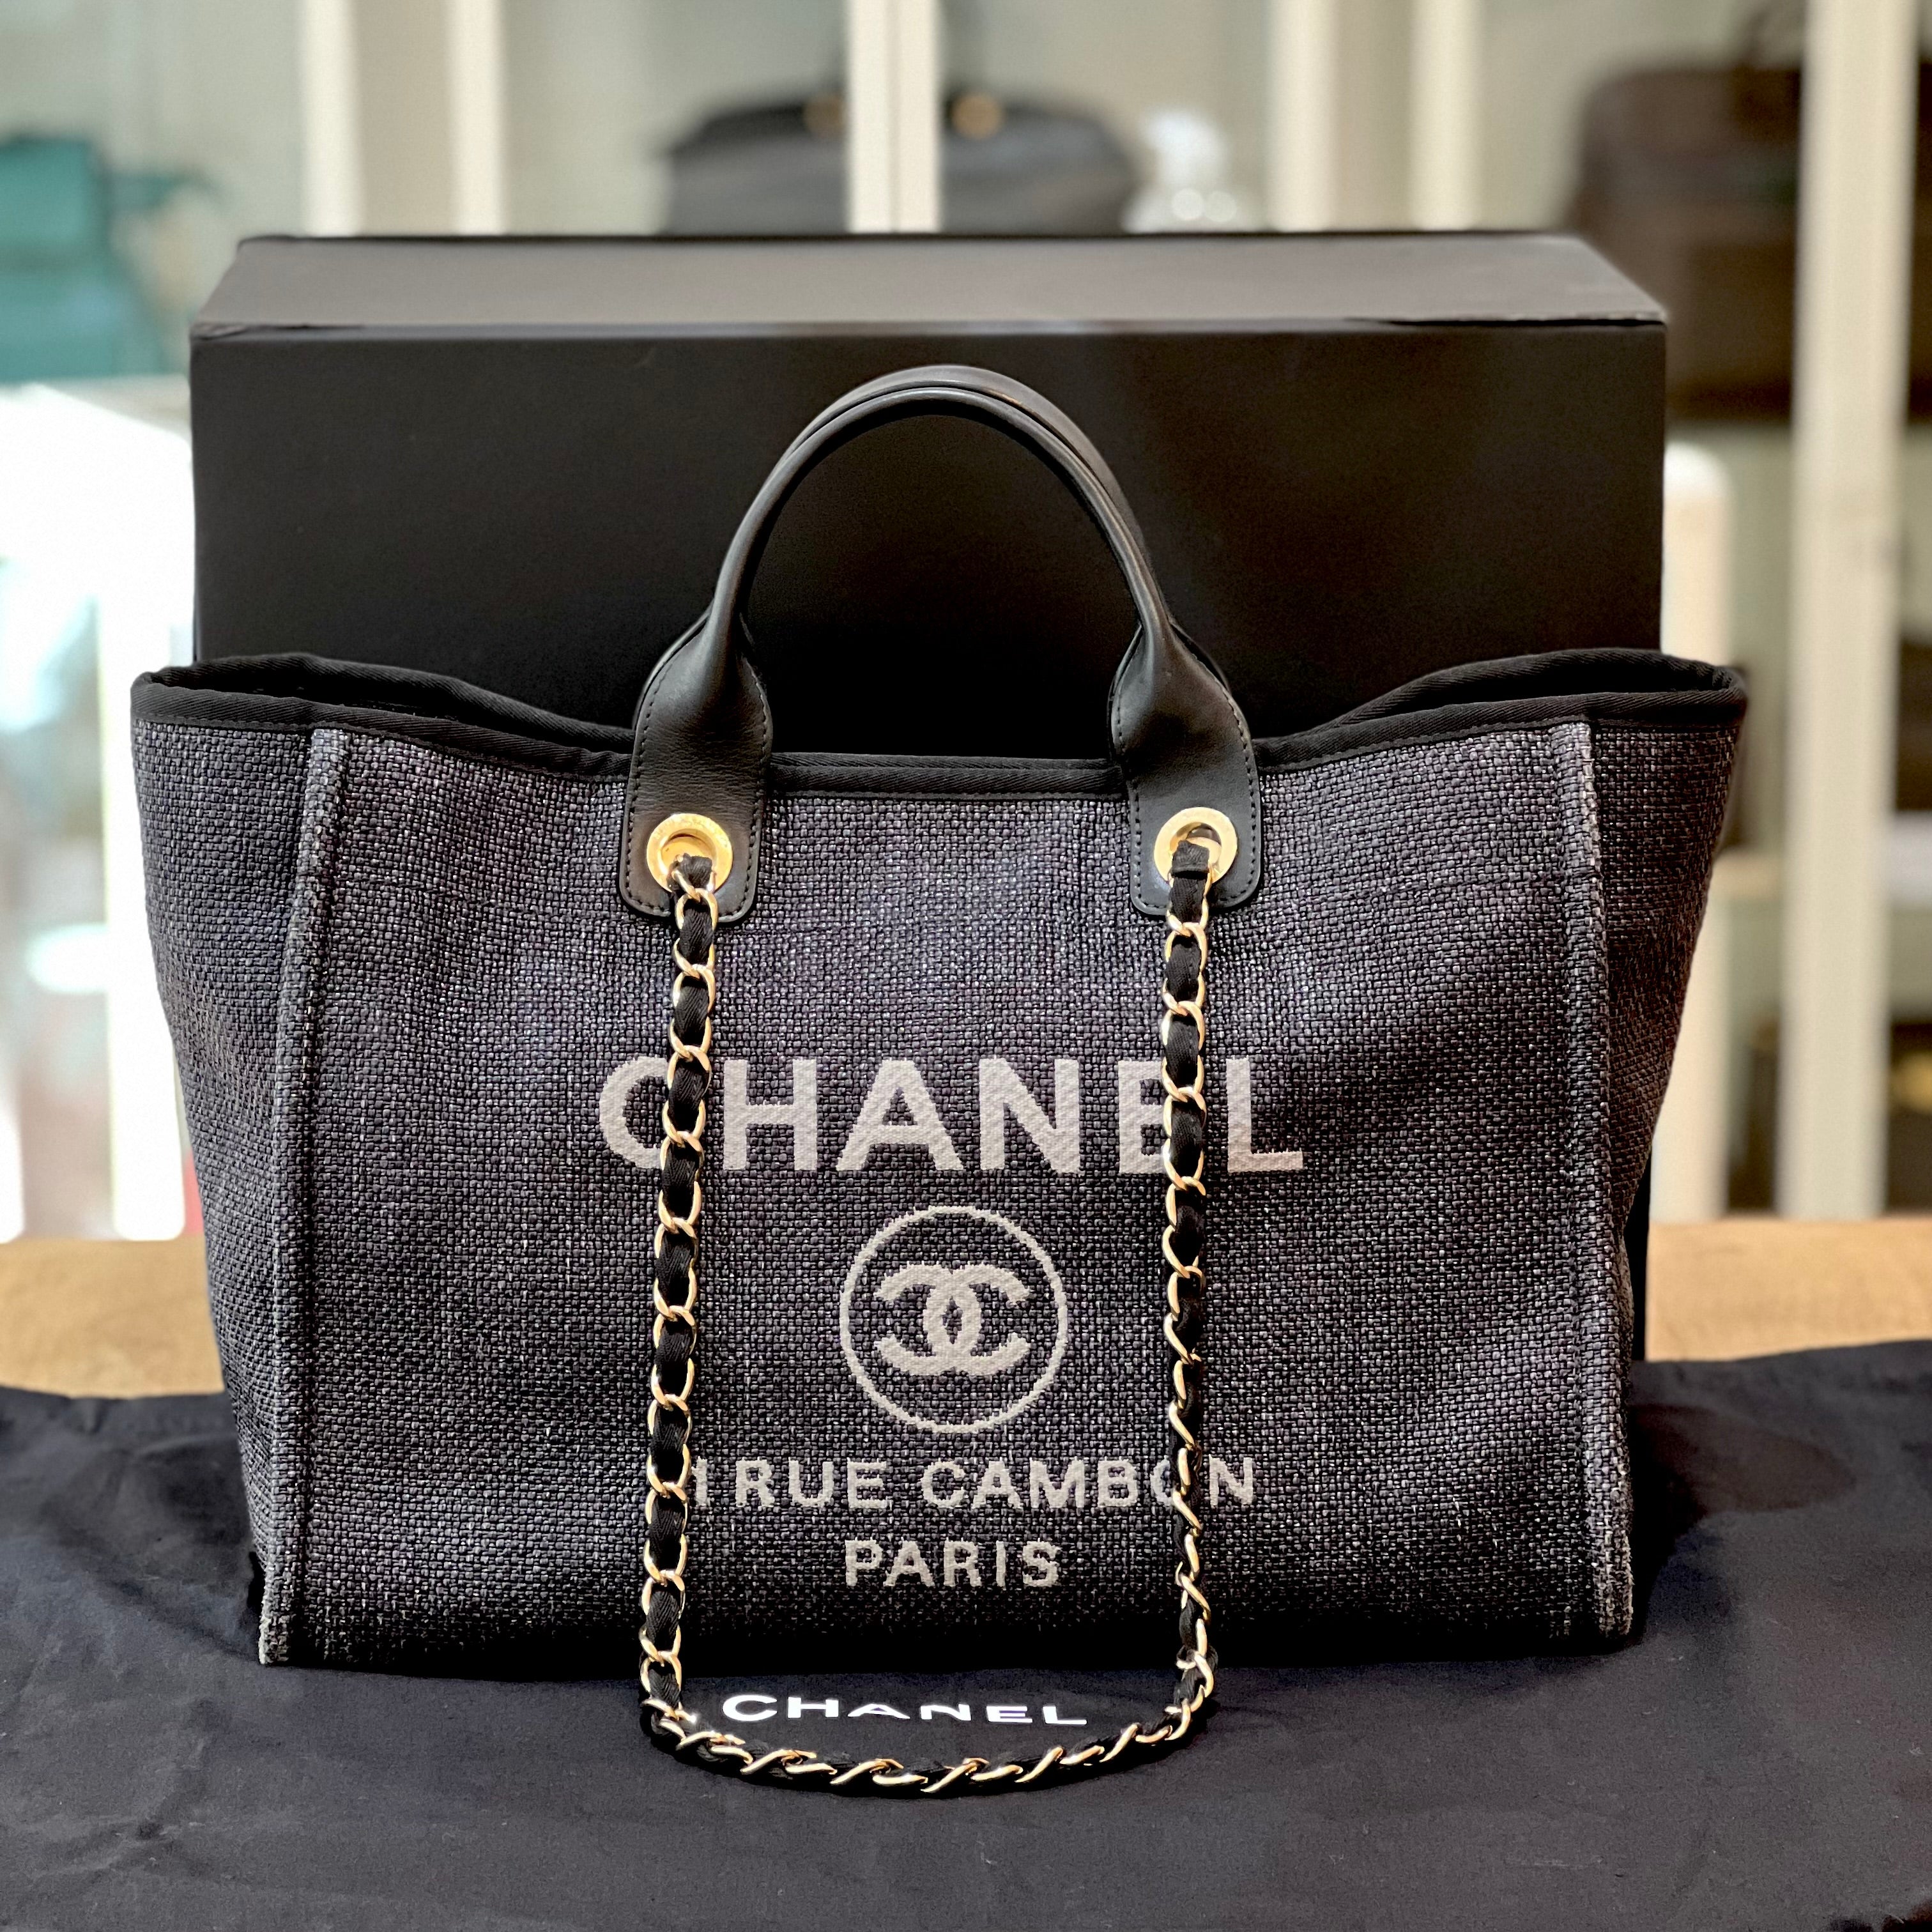 Chanel Deauville